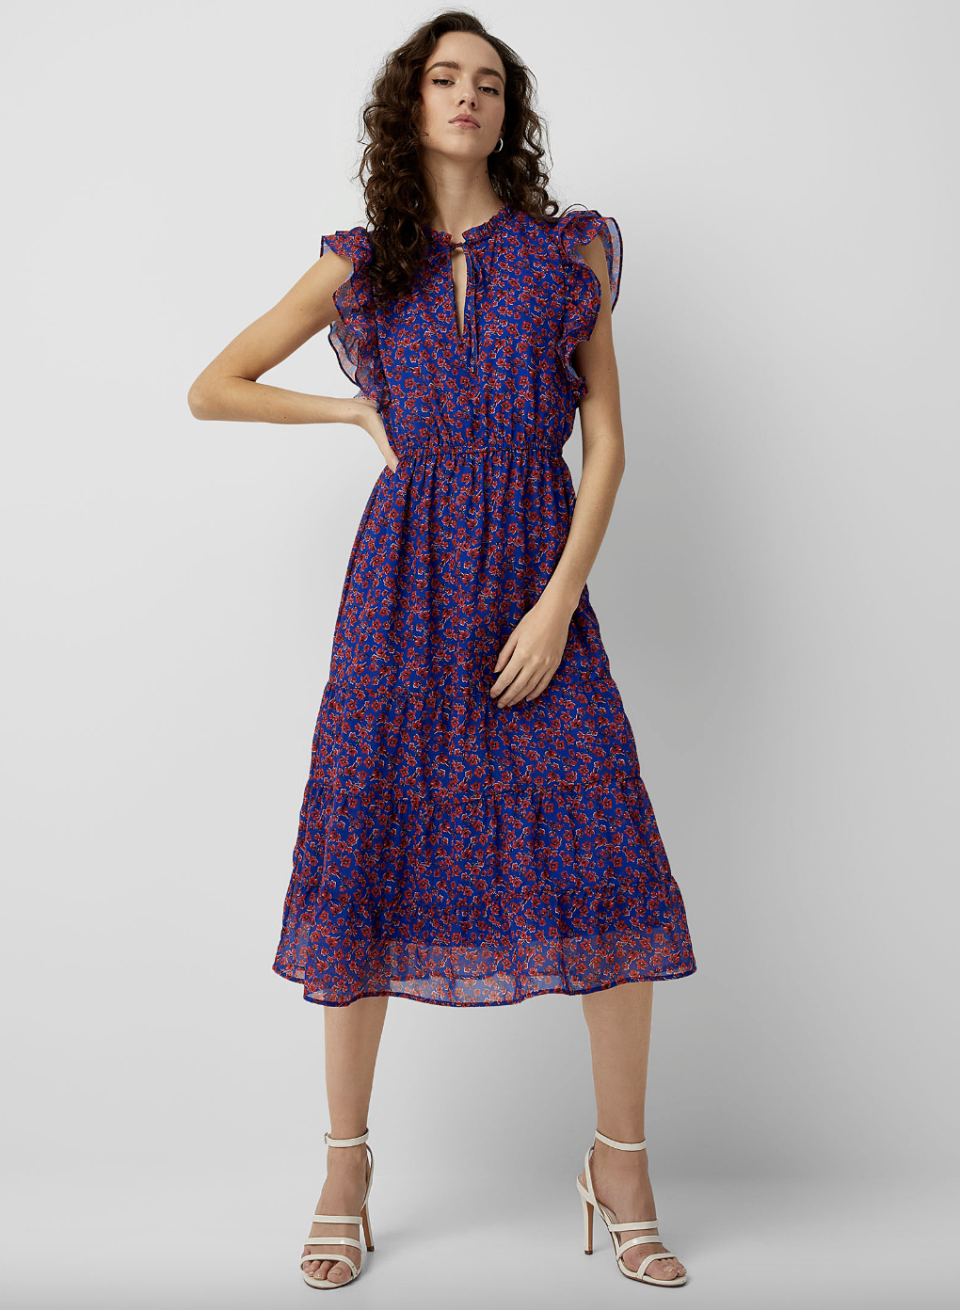 brunette model wearing purple, red and pink Icone Ruffled Floral Midi Dress (photo via Simons)